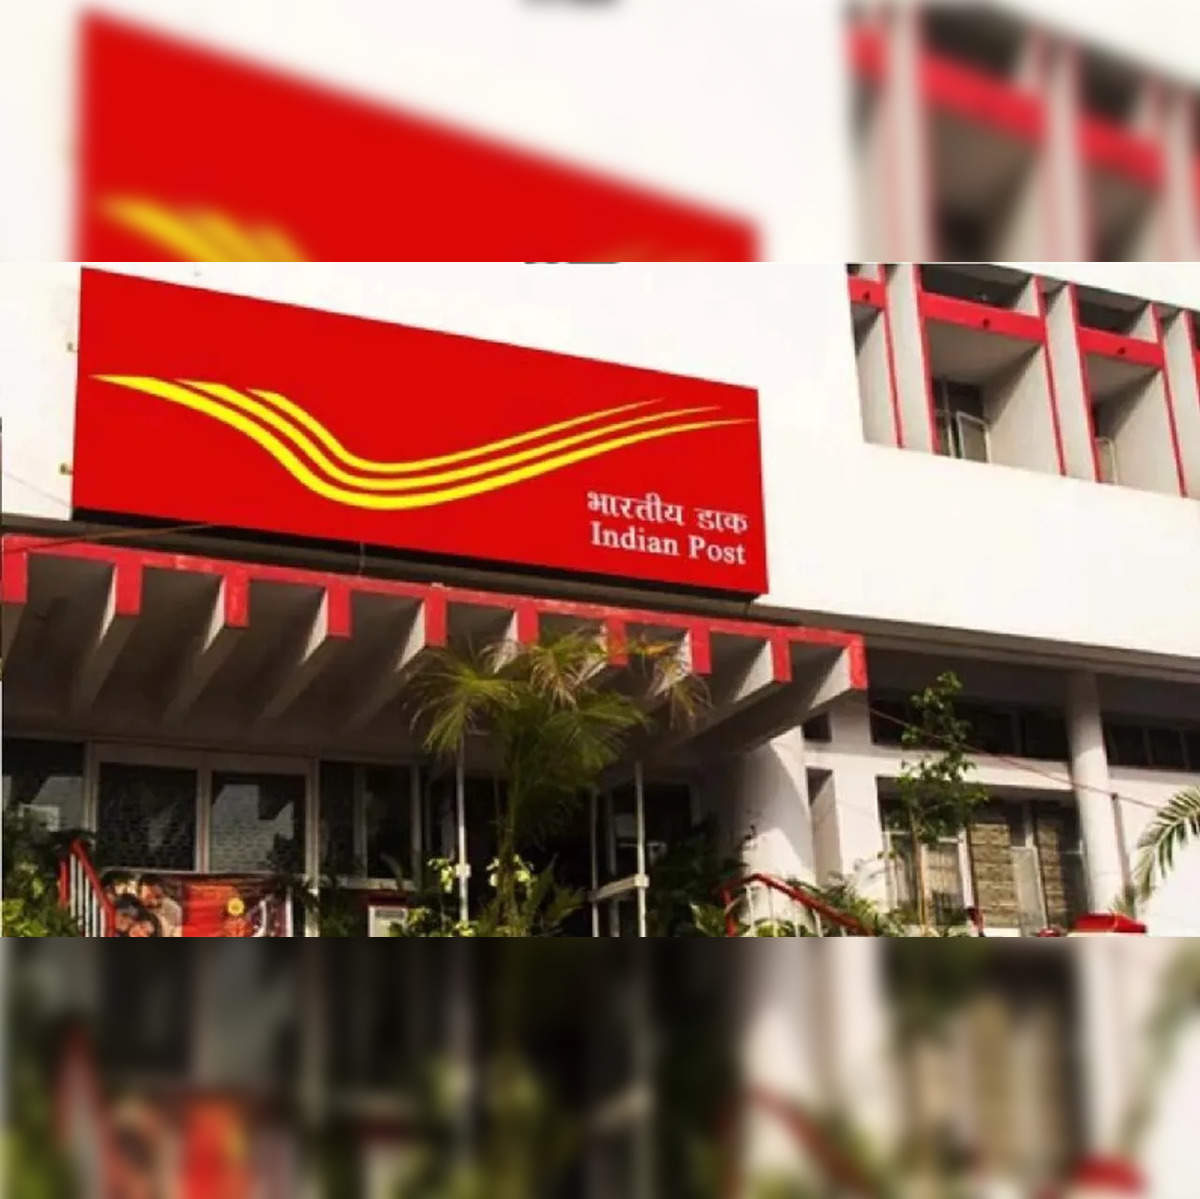 From Red to Green - India Post Needs Strategic Revival